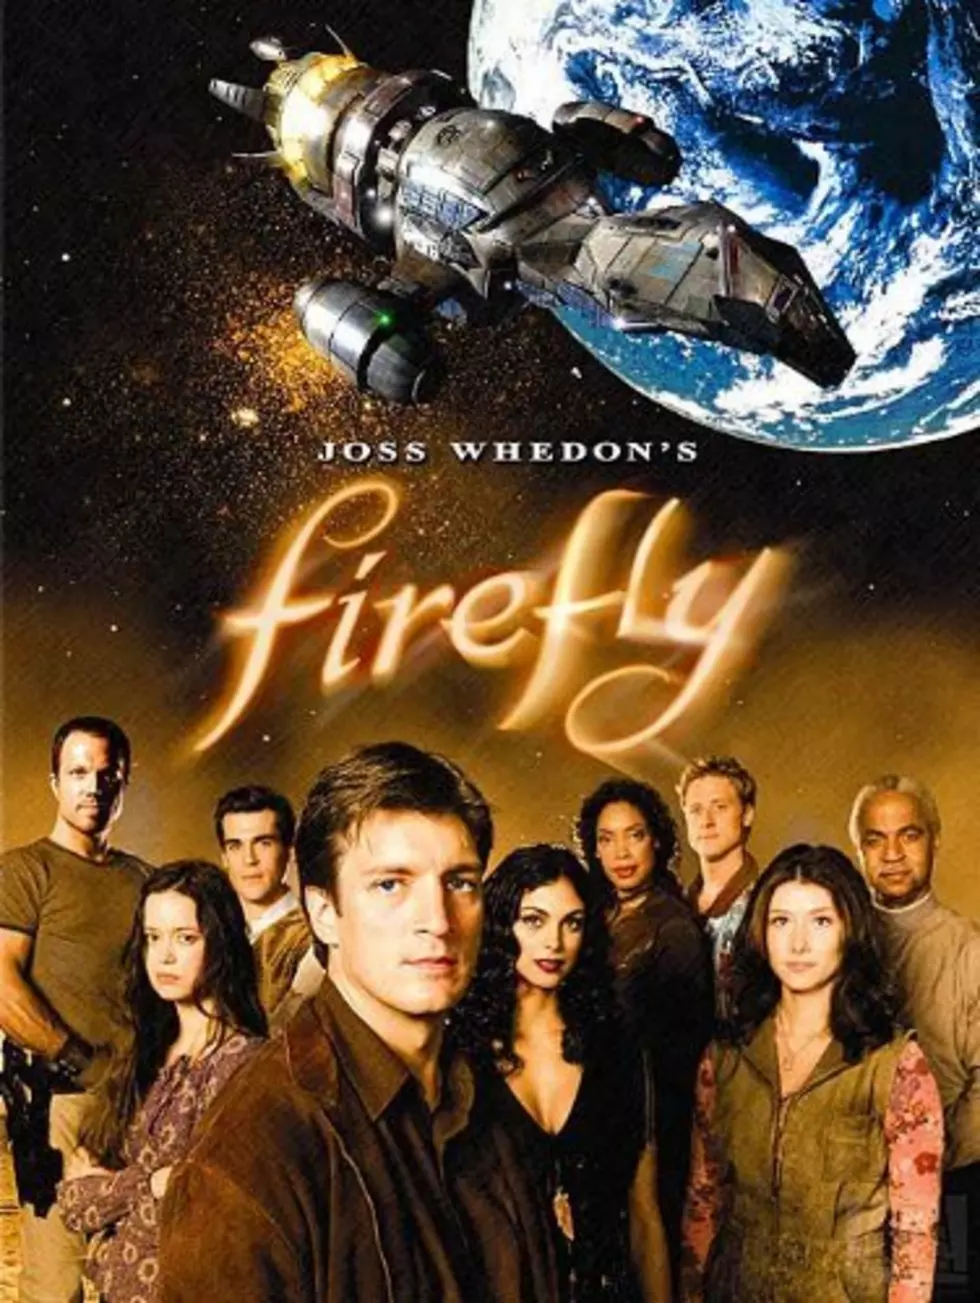 Professor Threatened With Criminal Charges For “Firefly” Poster